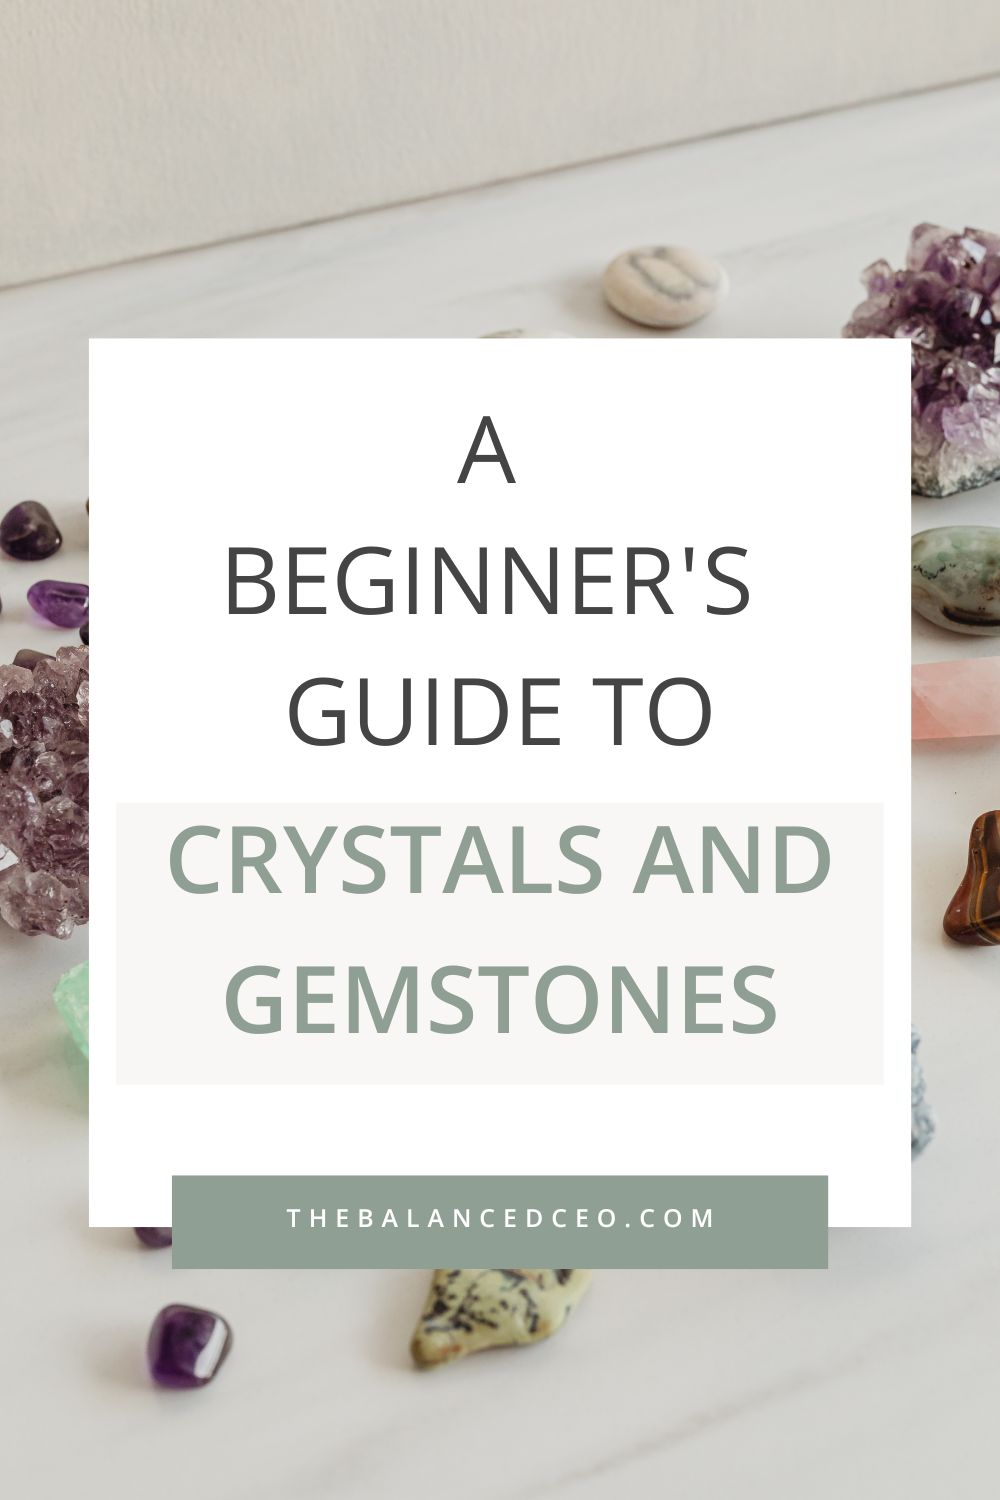 A Beginner\'s Guide to Crystals, Gemstones, and Their Uses